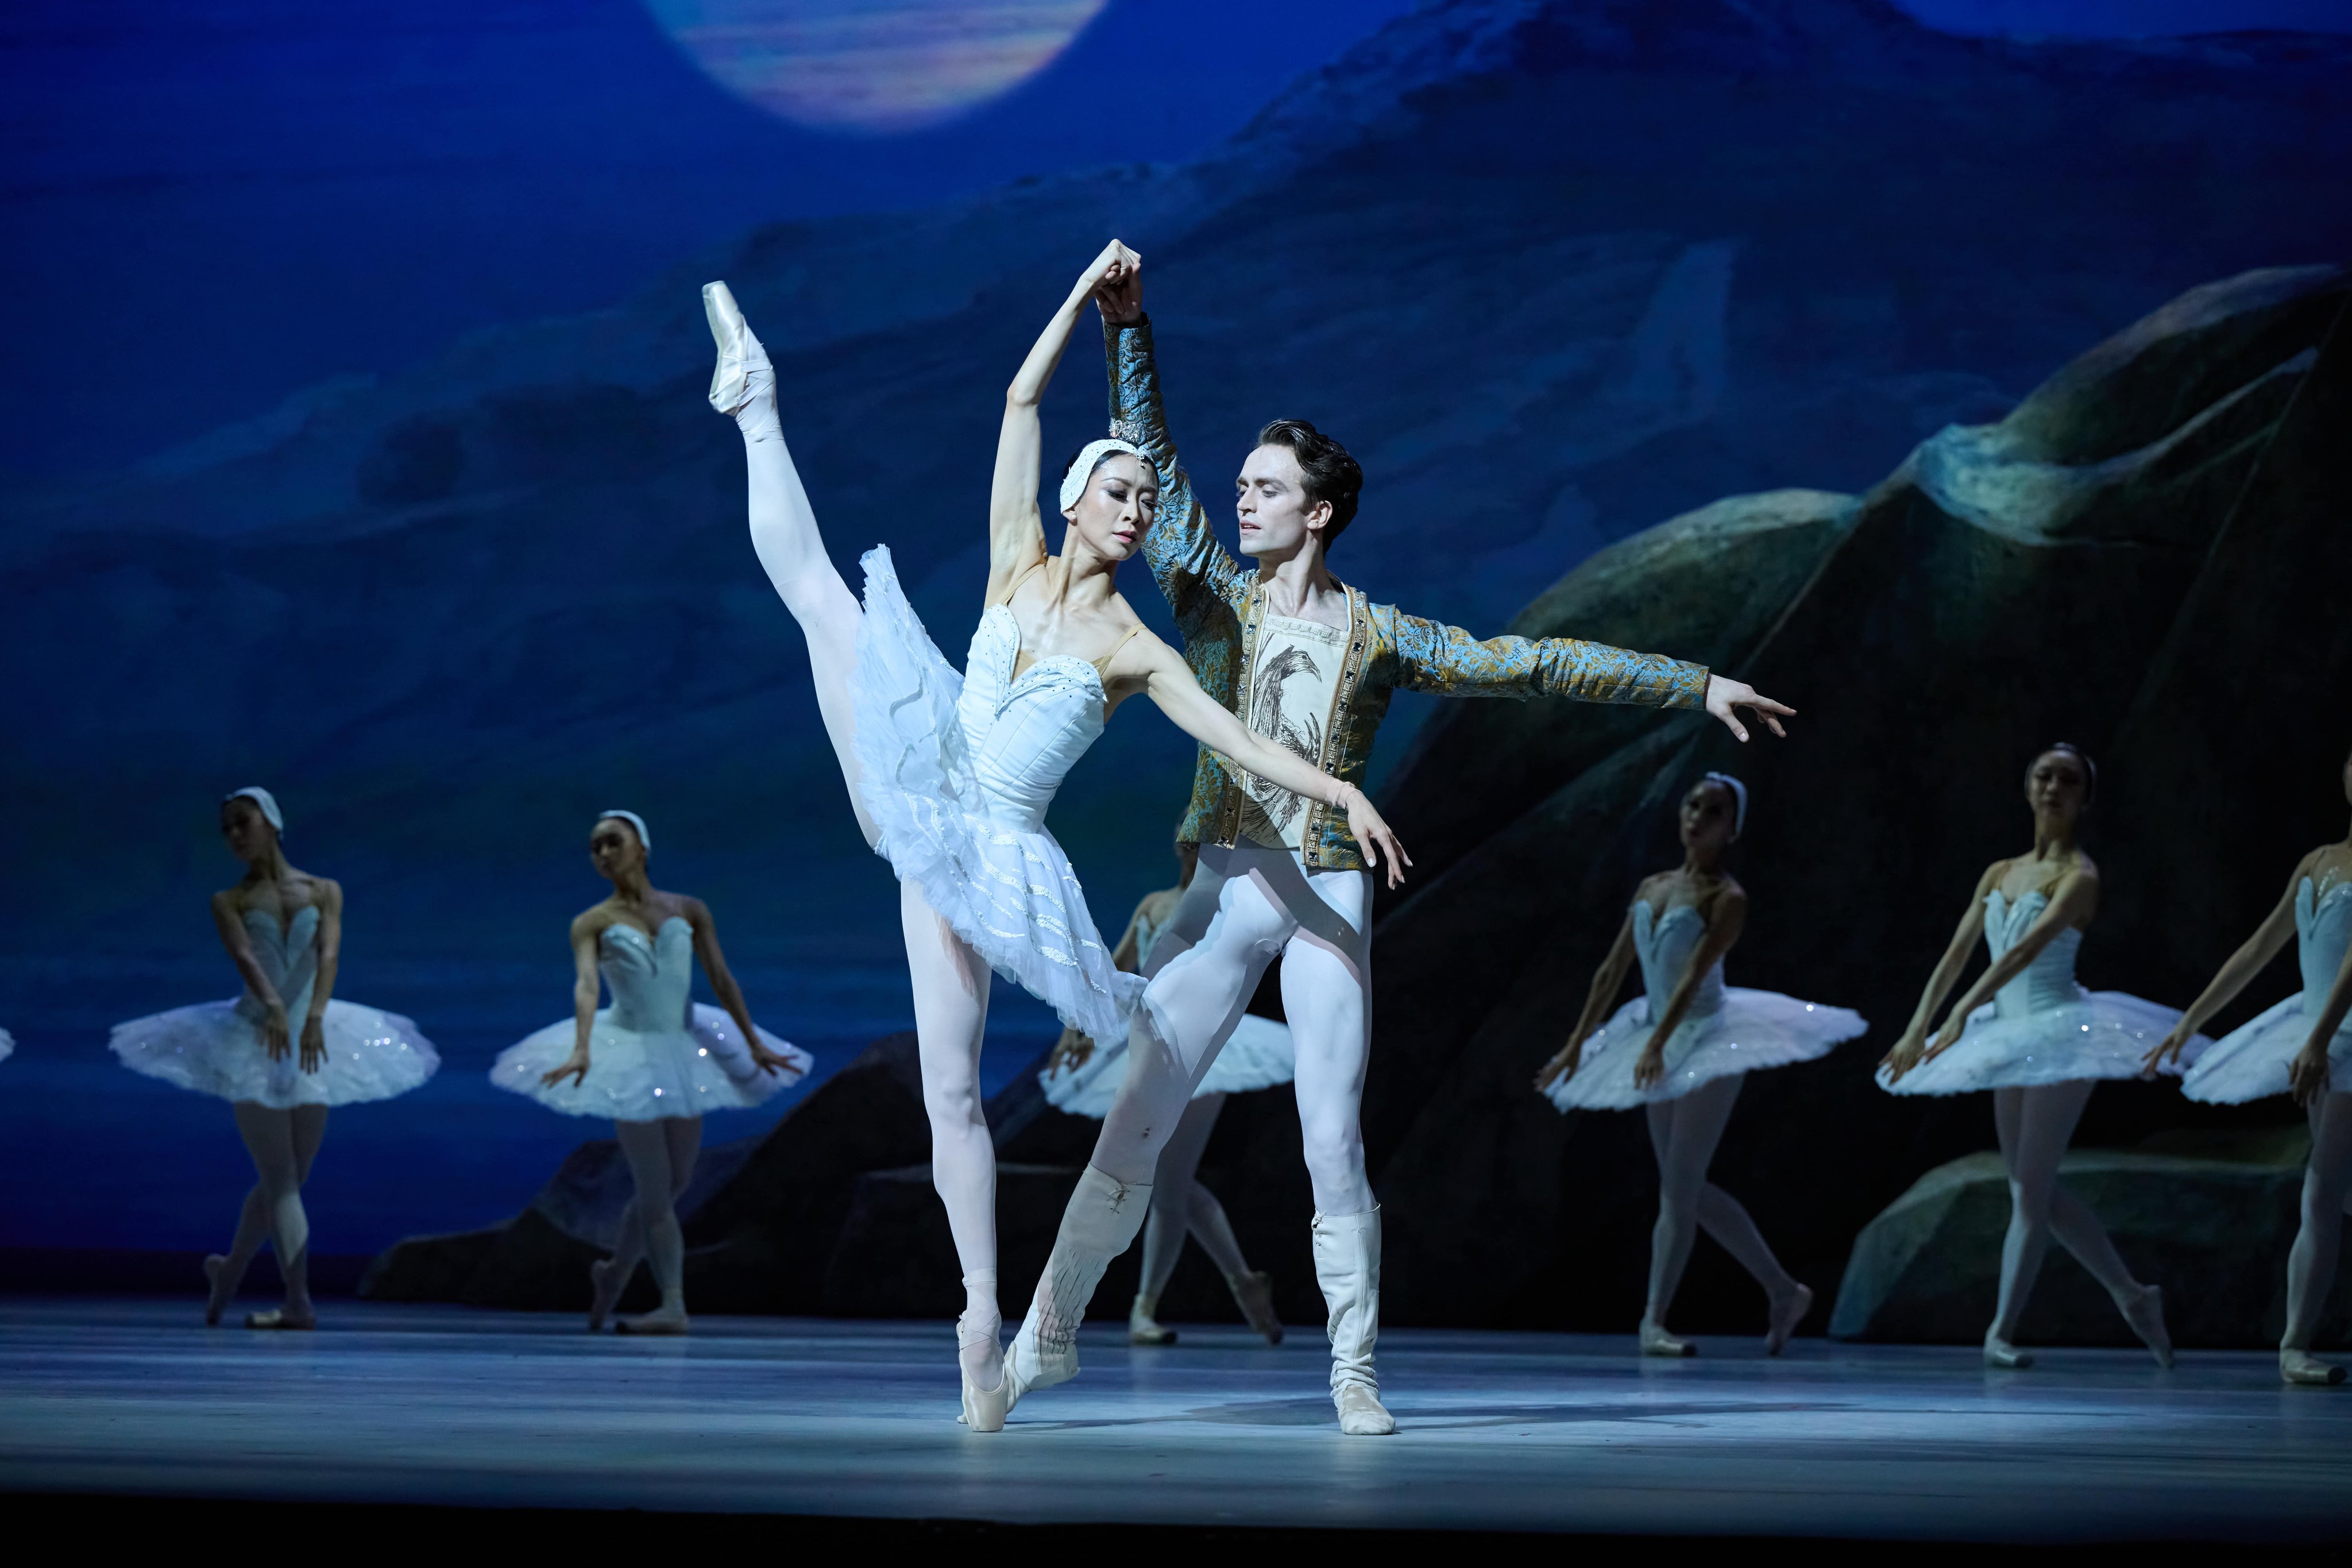 Ye Feifei, as Odette, dances with Matthew Ball, as Prince Siegfried, in Act 2 of Hong Kong Ballet’s new production of Swan Lake on May 31, 2024 at the Hong Kong Cultural Centre Grand Theatre. Photo: Conrad Dy-Liacco, courtesy of Hong Kong Ballet